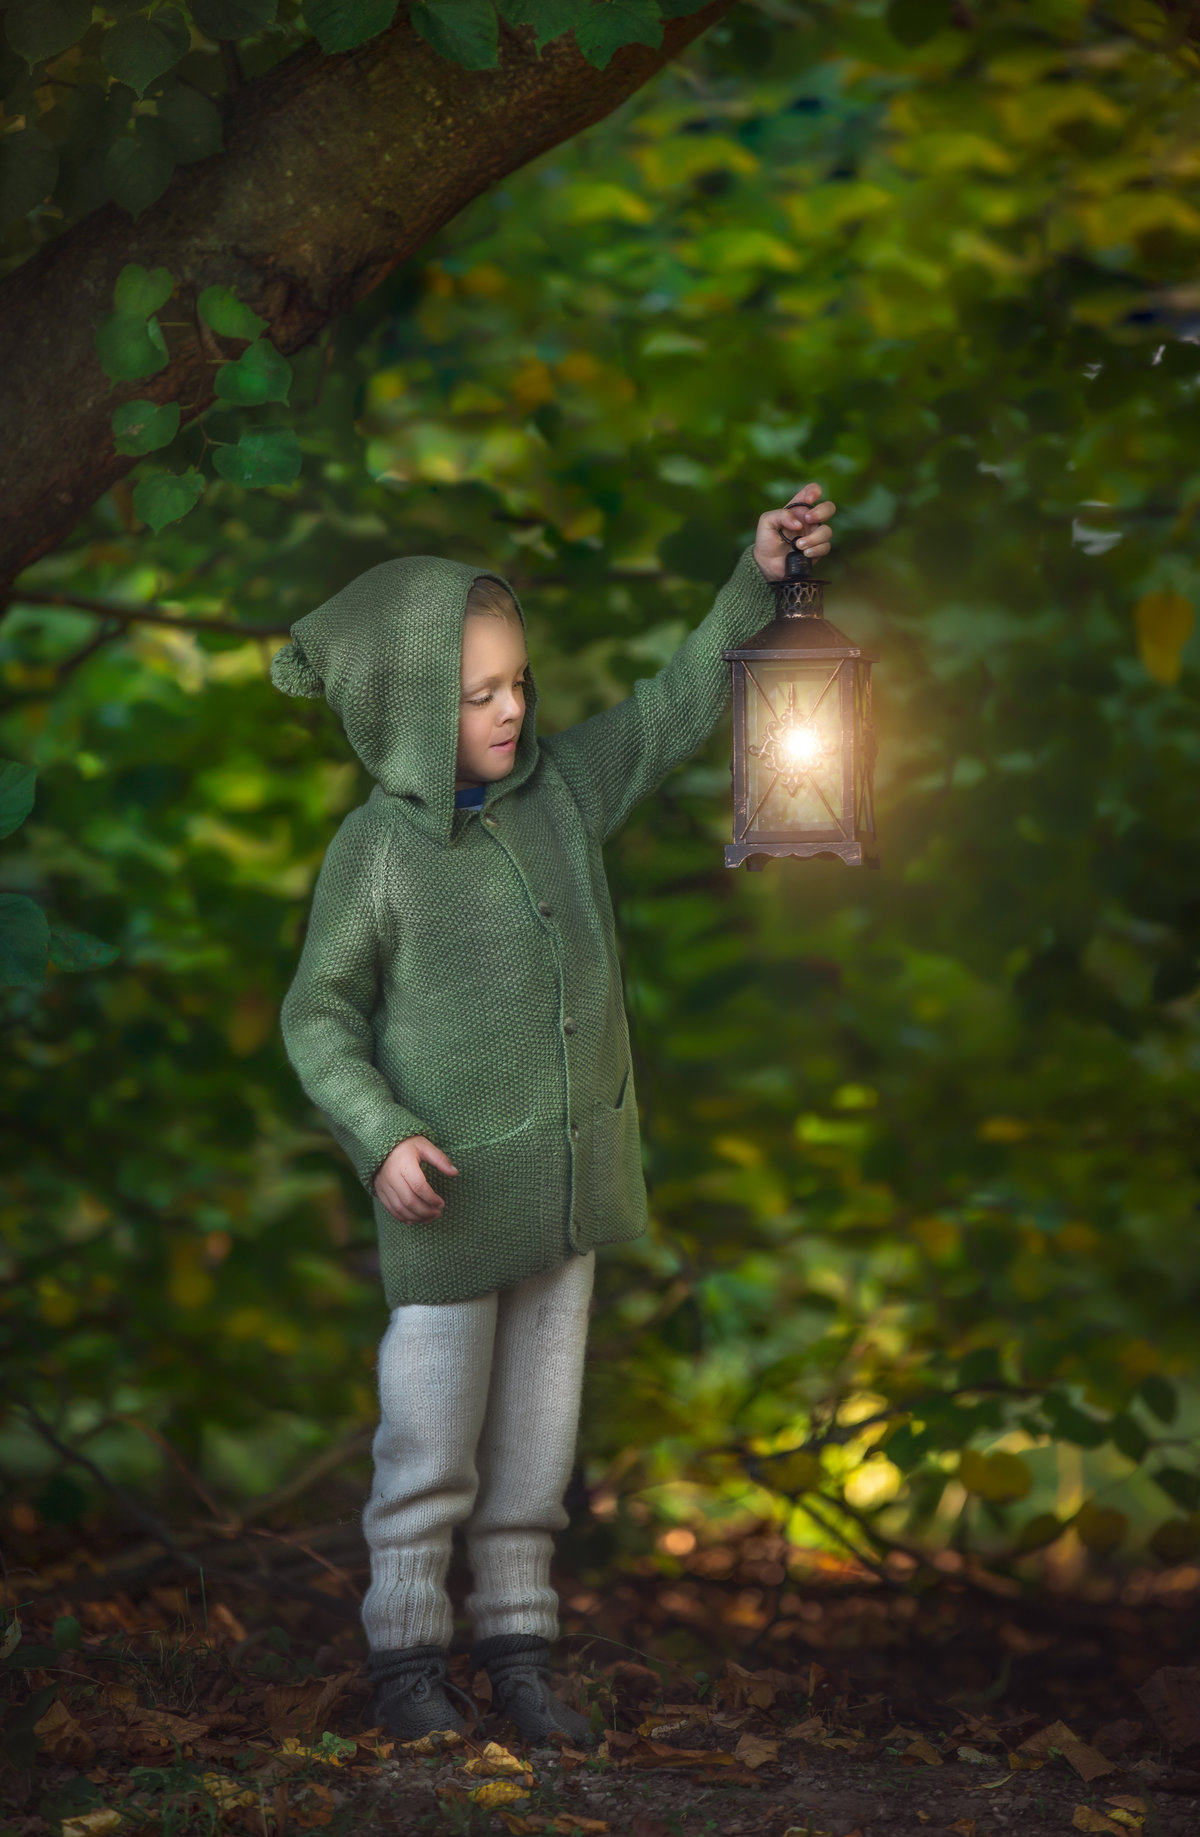 Yound boy dressed in green knit sweater holding a lit lantern posed in a vibrant green forest  in Ottawa